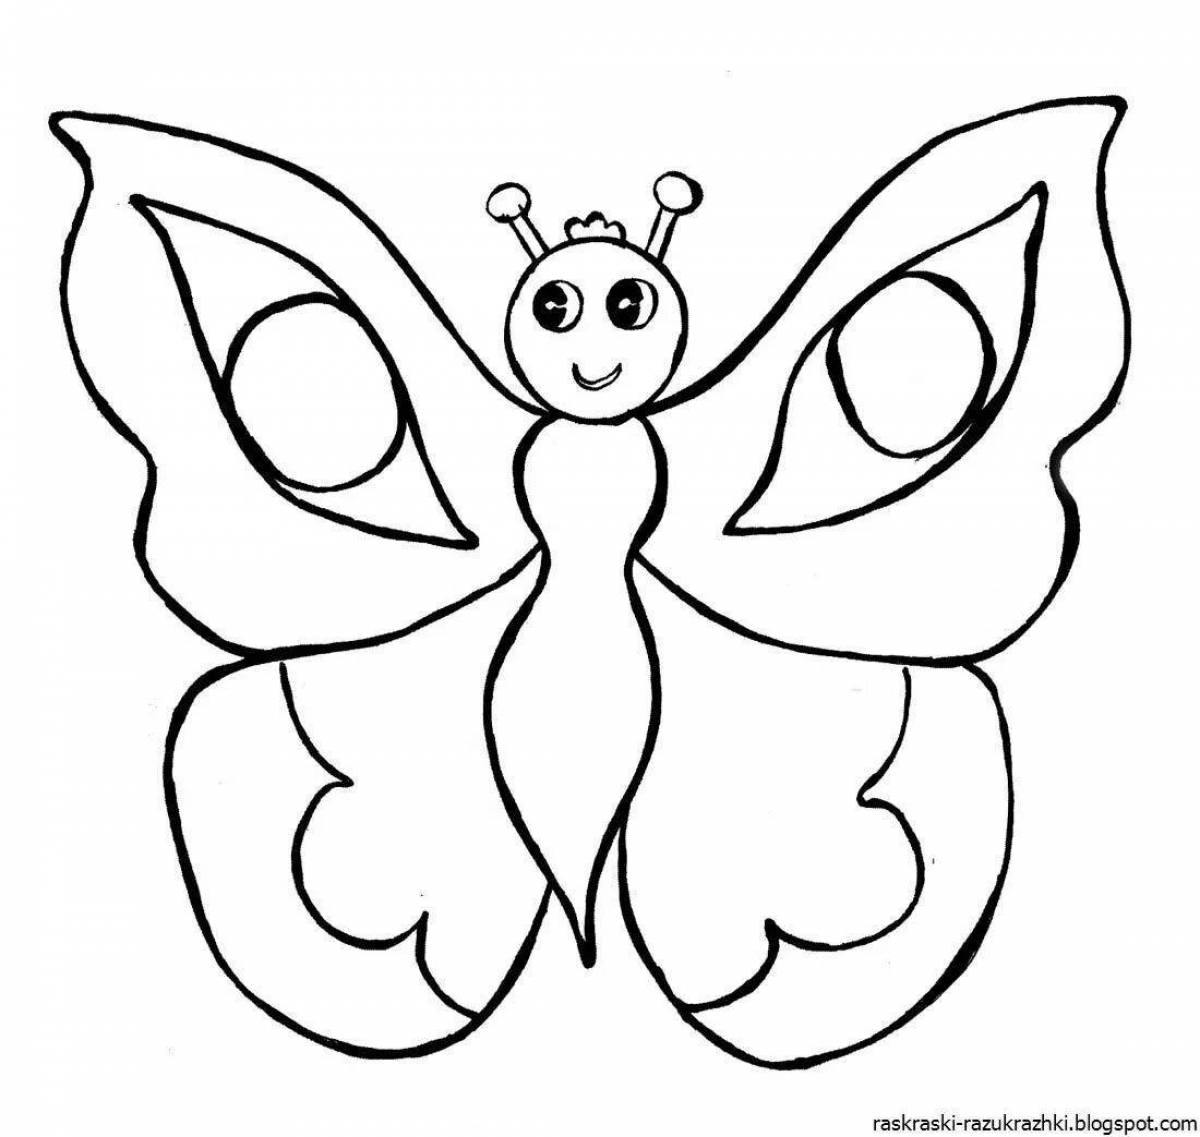 Colorful butterfly coloring page for 4-5 year olds